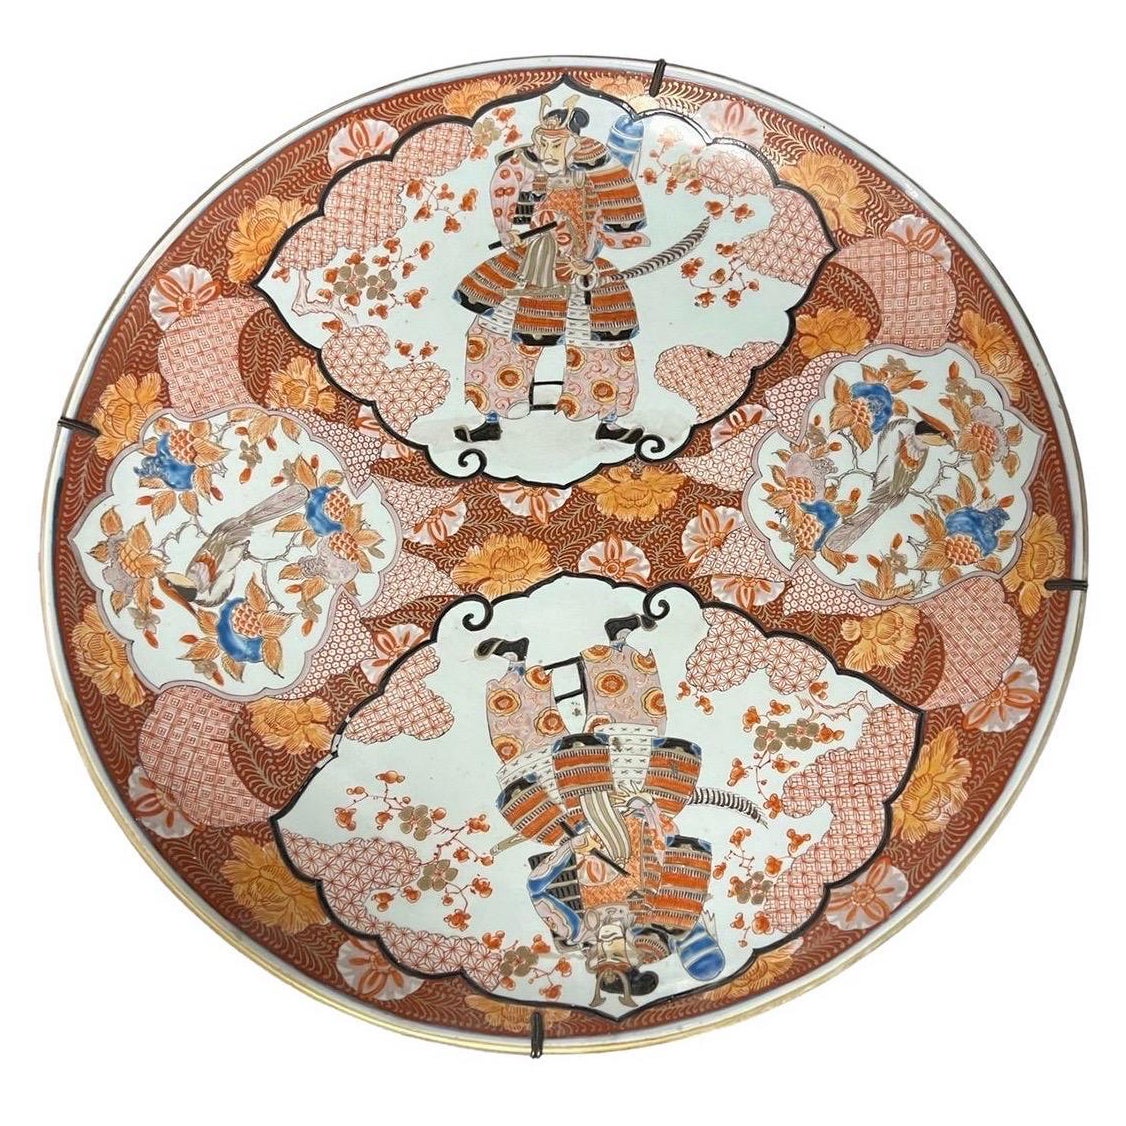 Early 20th Century Meiji Period Japanese Samurai Enamel Decorated Charger For Sale